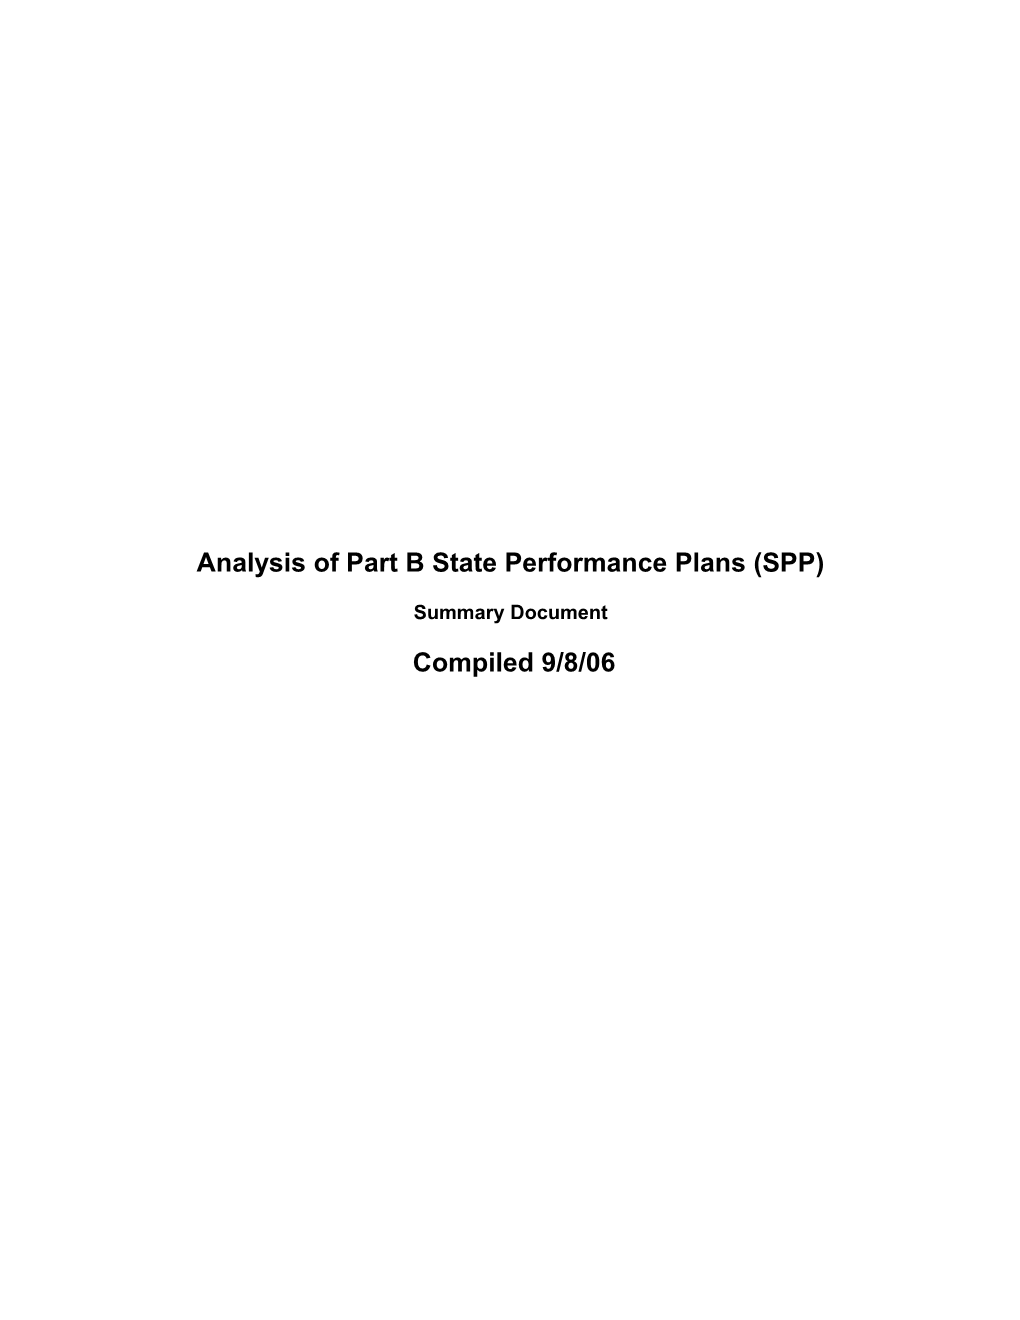 Analysis of Part B State Performance Plans (SPP)